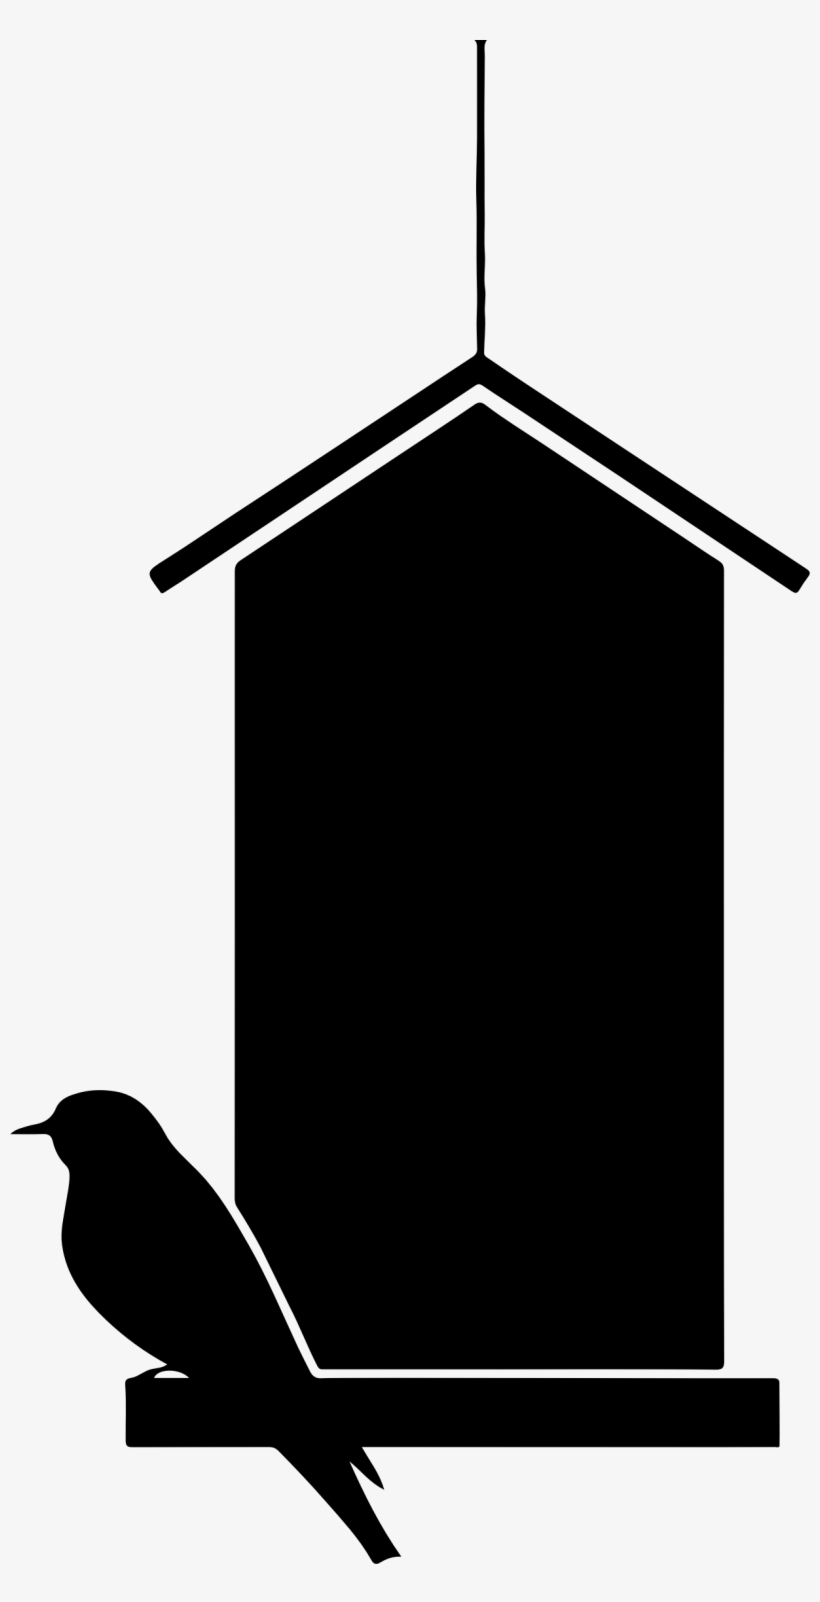 Bird House Silhouette Black And White - Bird Houses In Black And White ...